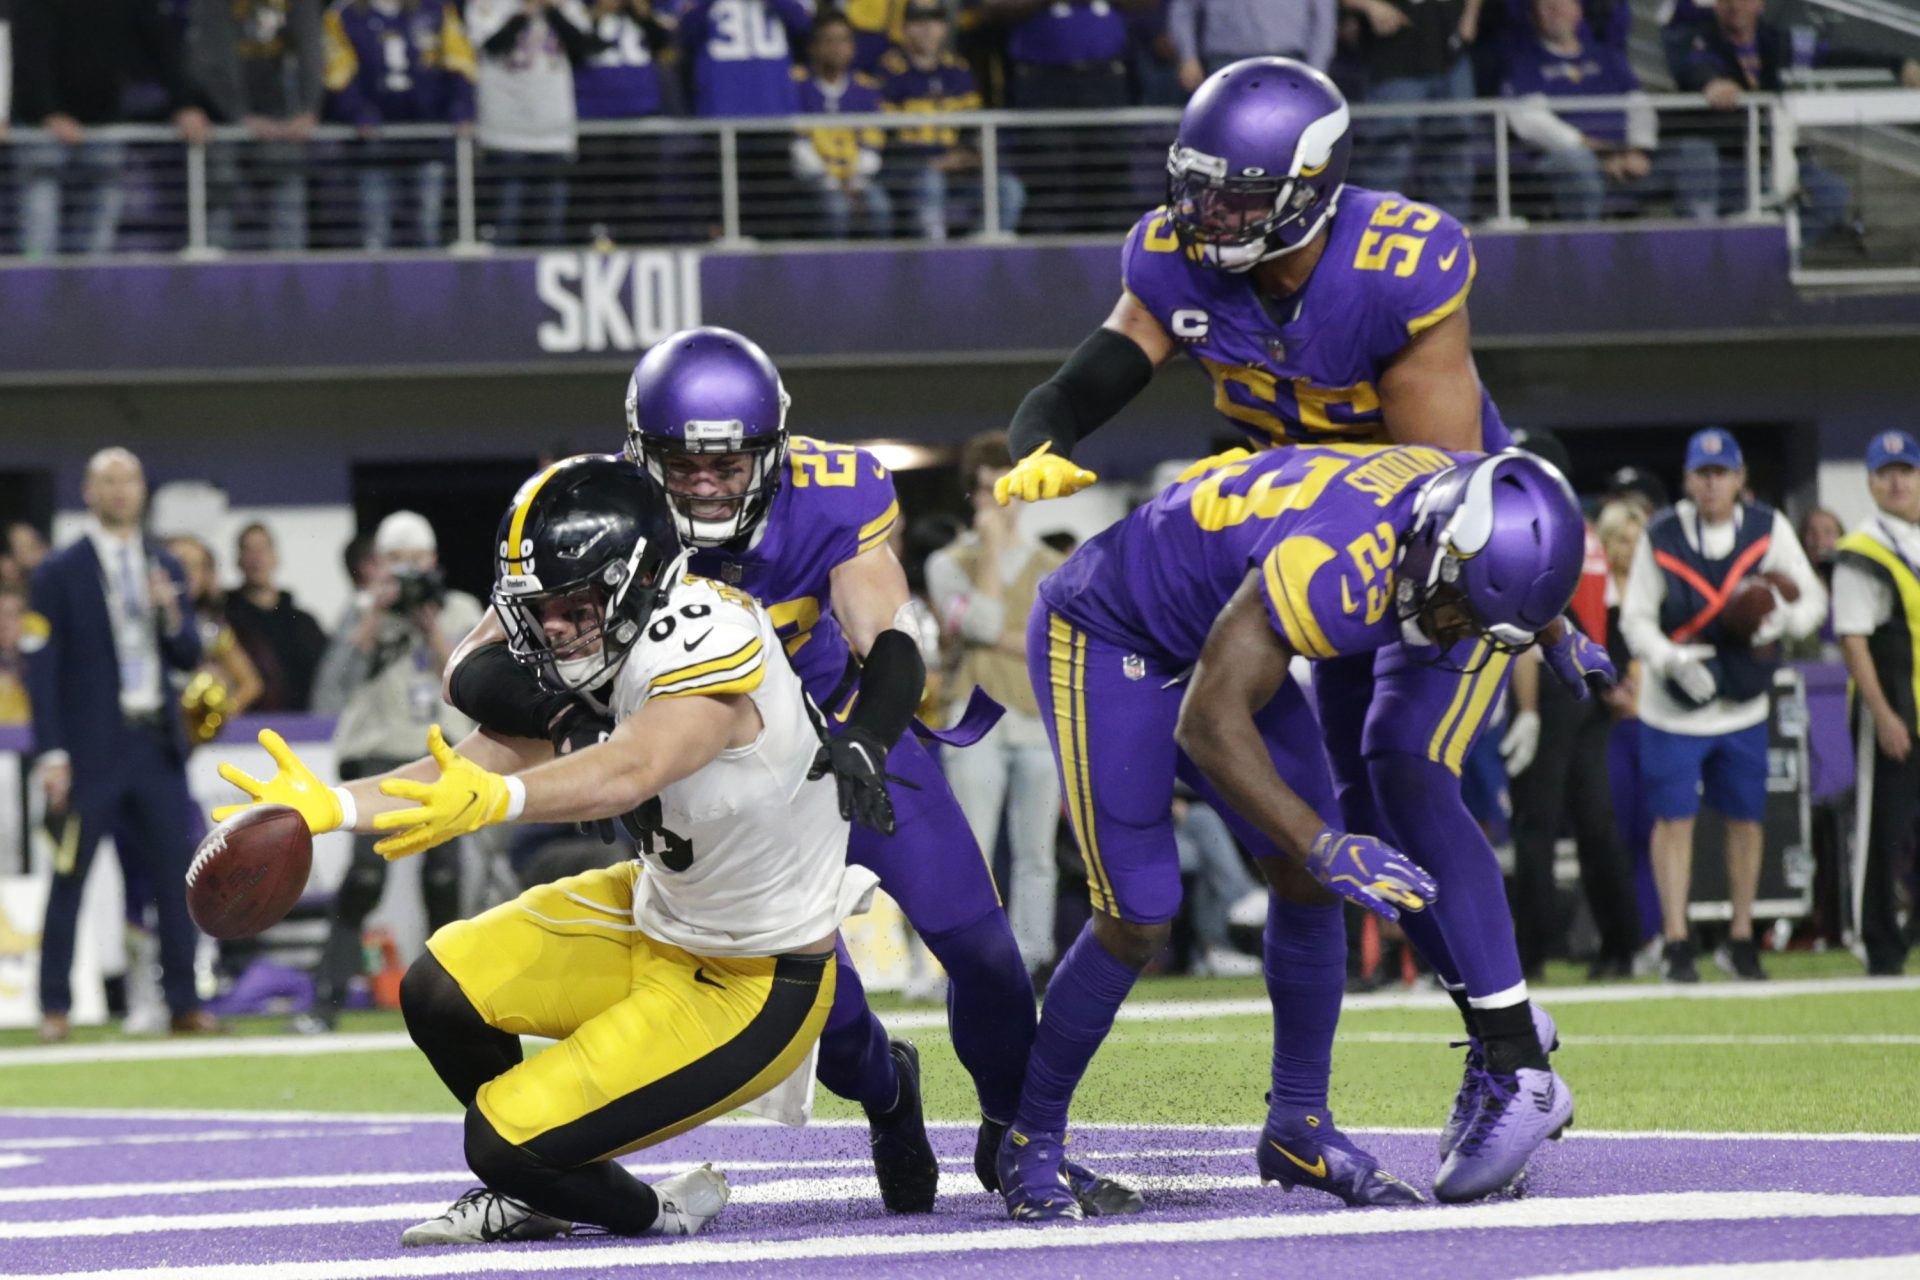 Minnesota Vikings defenders safety Harrison Smith (22), outside linebacker Anthony Barr (55) and free safety Xavier Woods (23) break up a pass intended for Pittsburgh Steelers tight end Pat Freiermuth (88) in the end zone at the end of an NFL football game, Thursday, Dec. 9, 2021, in Minneapolis. The Vikings won 36-28.